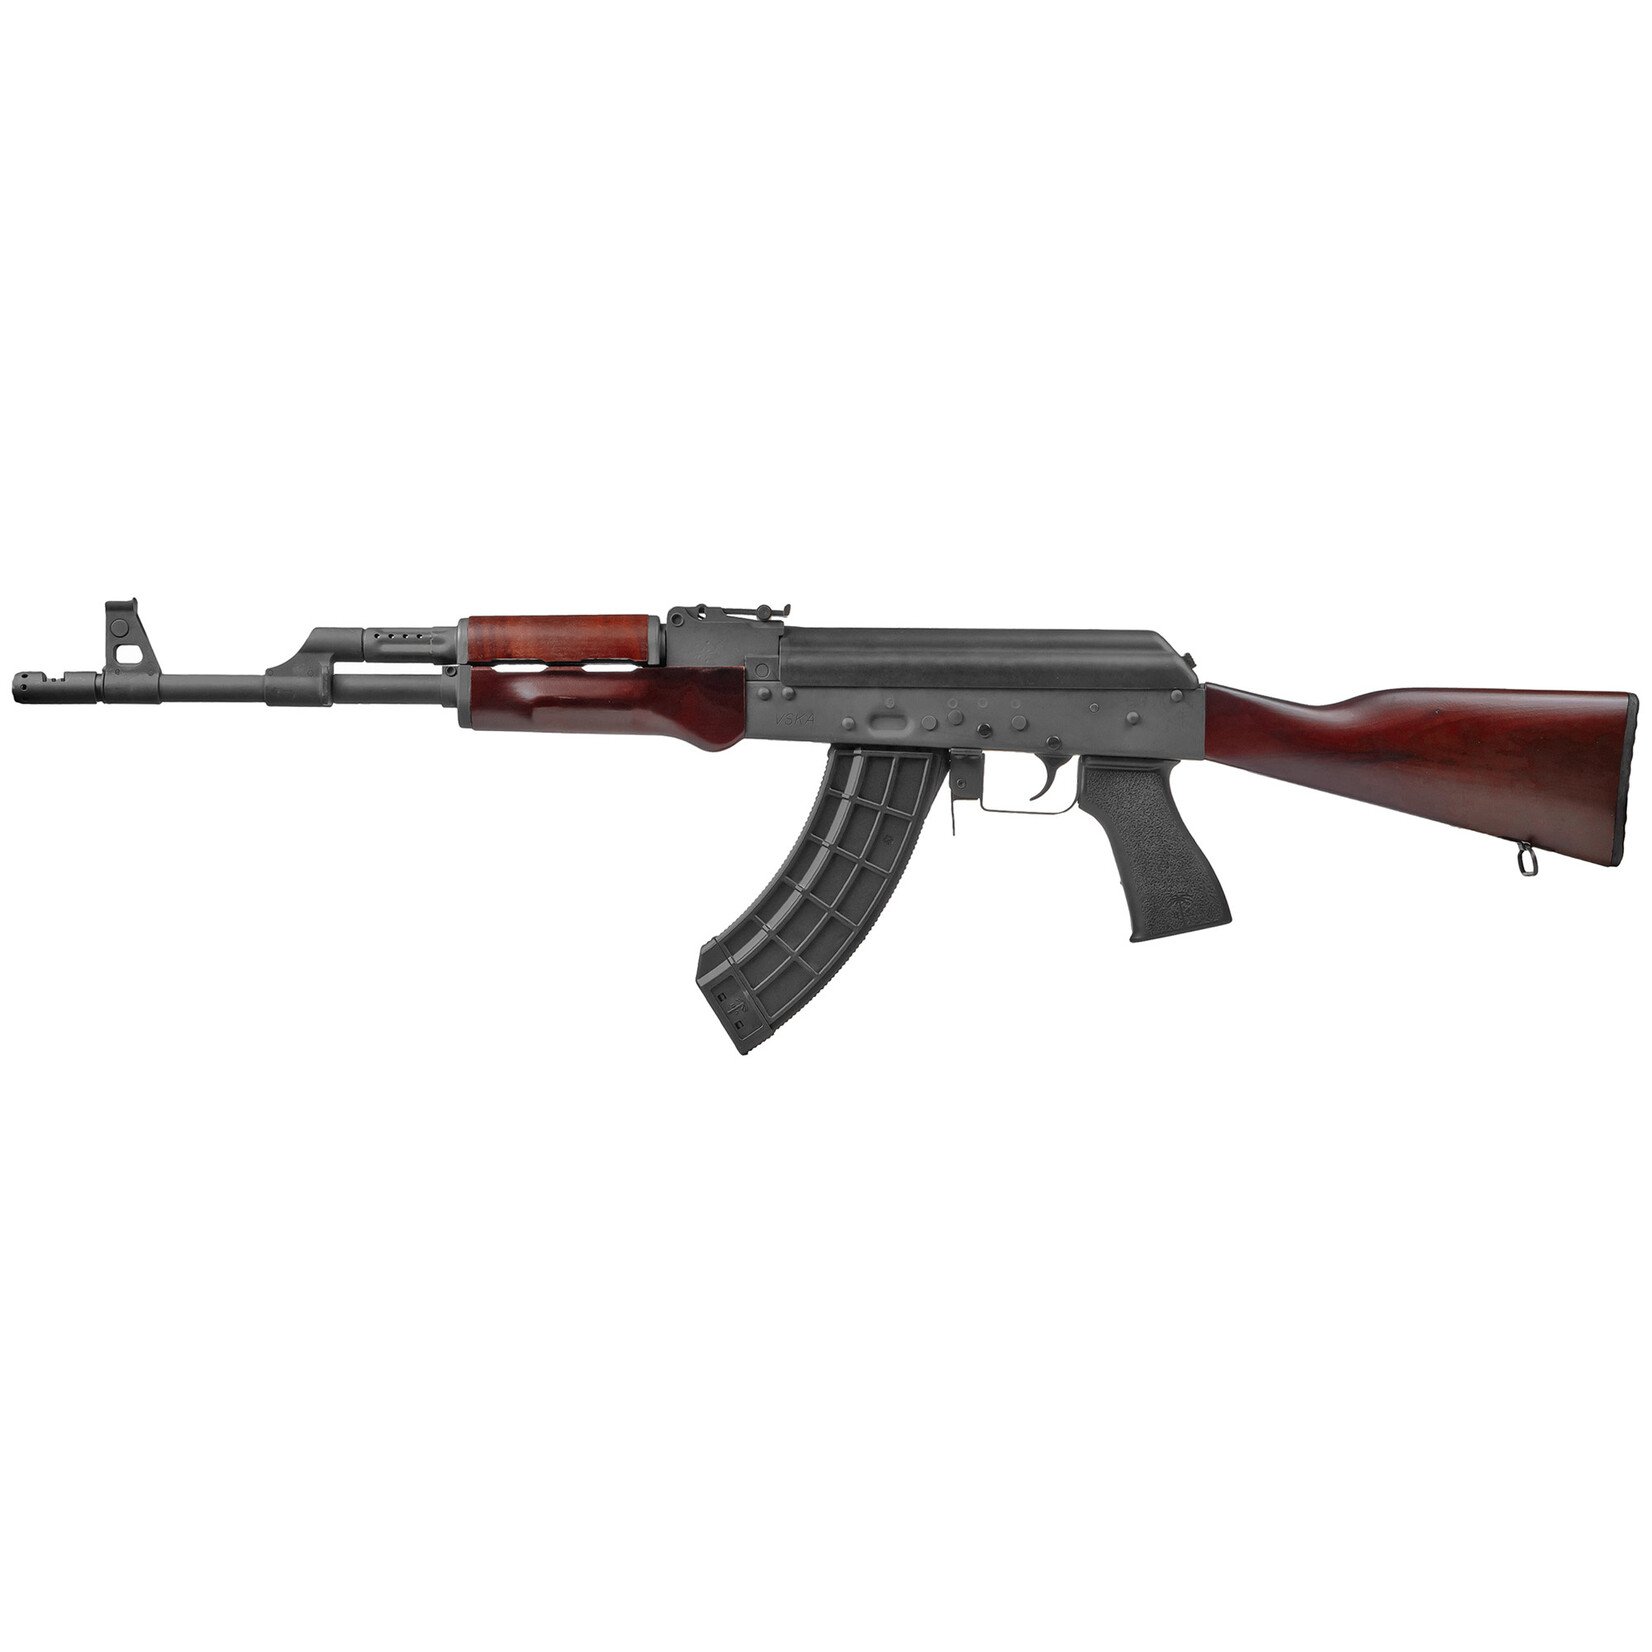 CENTURY ARMS CENTURY ARMS VSKA, 7.62X39, RUSSIAN RED, 16.25''BBL, 30+1